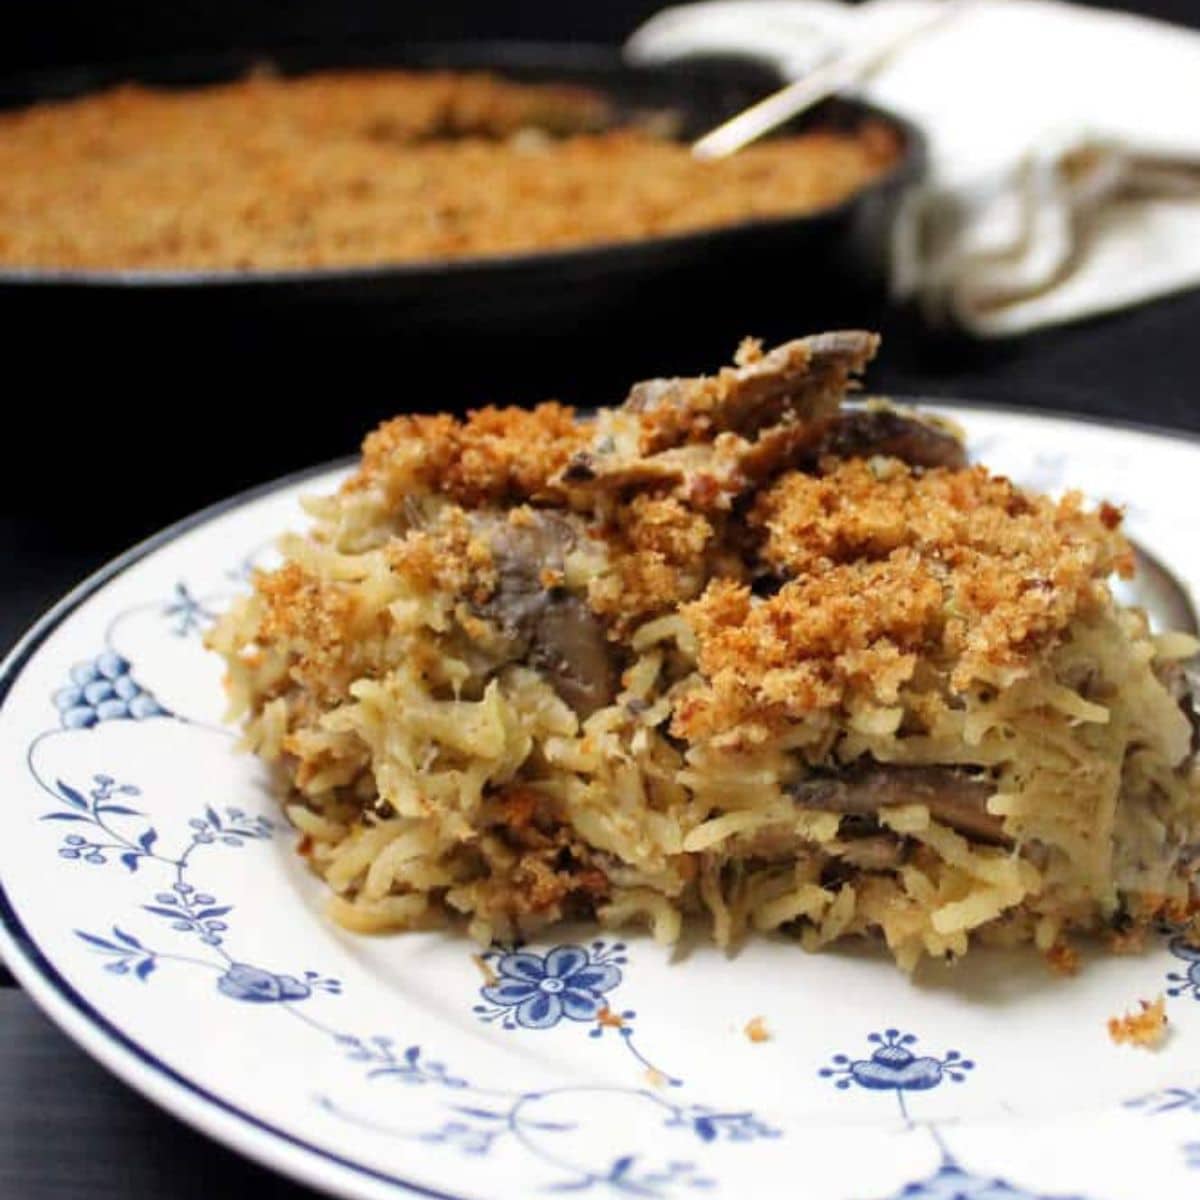 Vegan mushroom rice casserole in dish with cast iron pan in background.